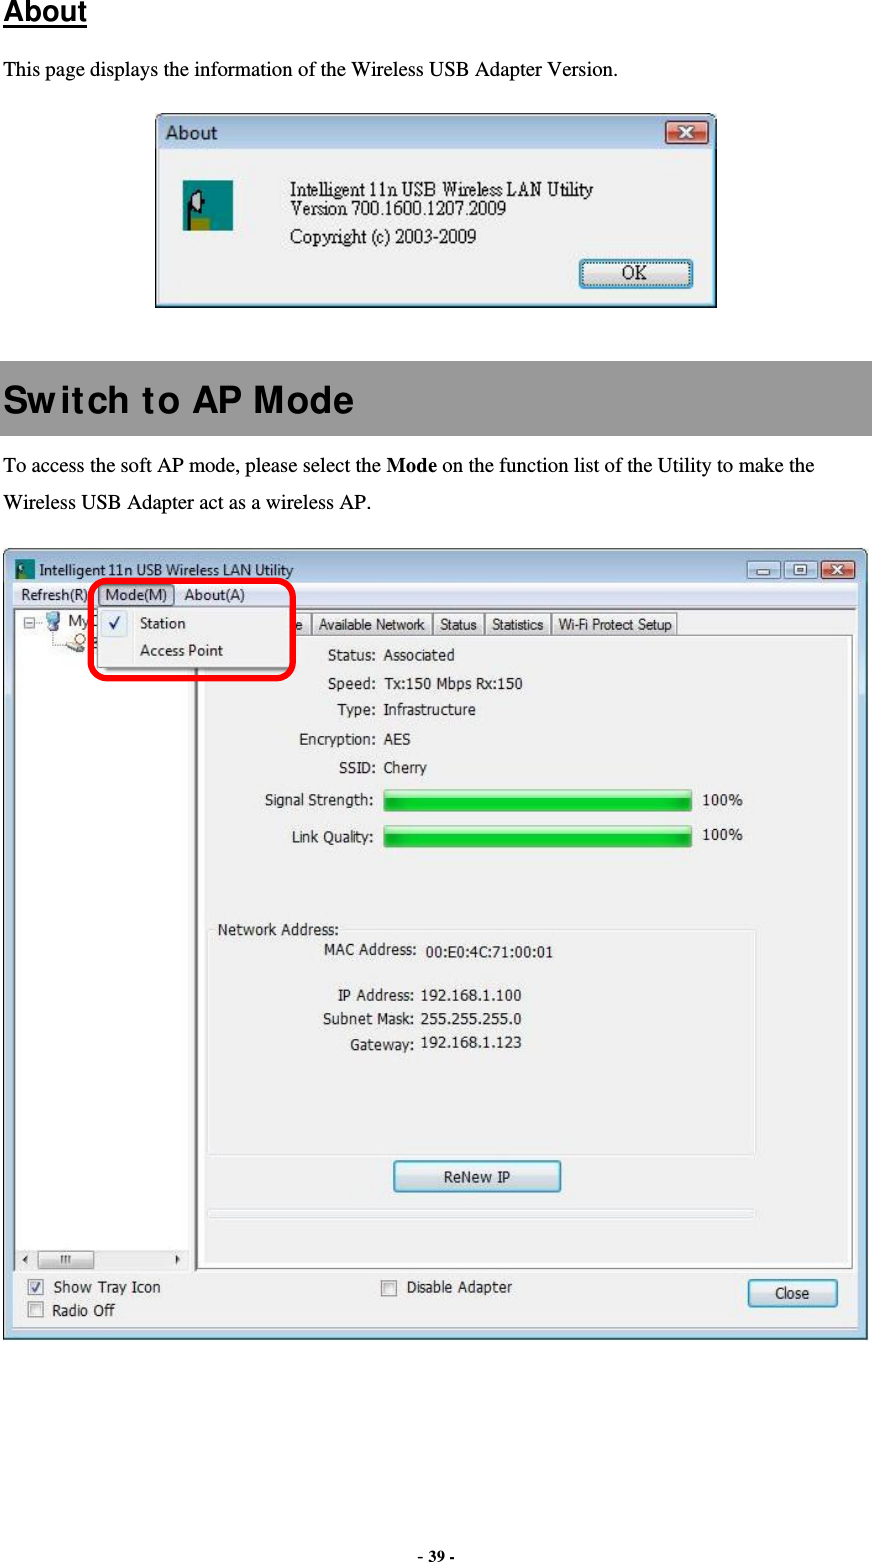  - 39 - About This page displays the information of the Wireless USB Adapter Version.   Switch to AP Mode To access the soft AP mode, please select the Mode on the function list of the Utility to make the Wireless USB Adapter act as a wireless AP.   